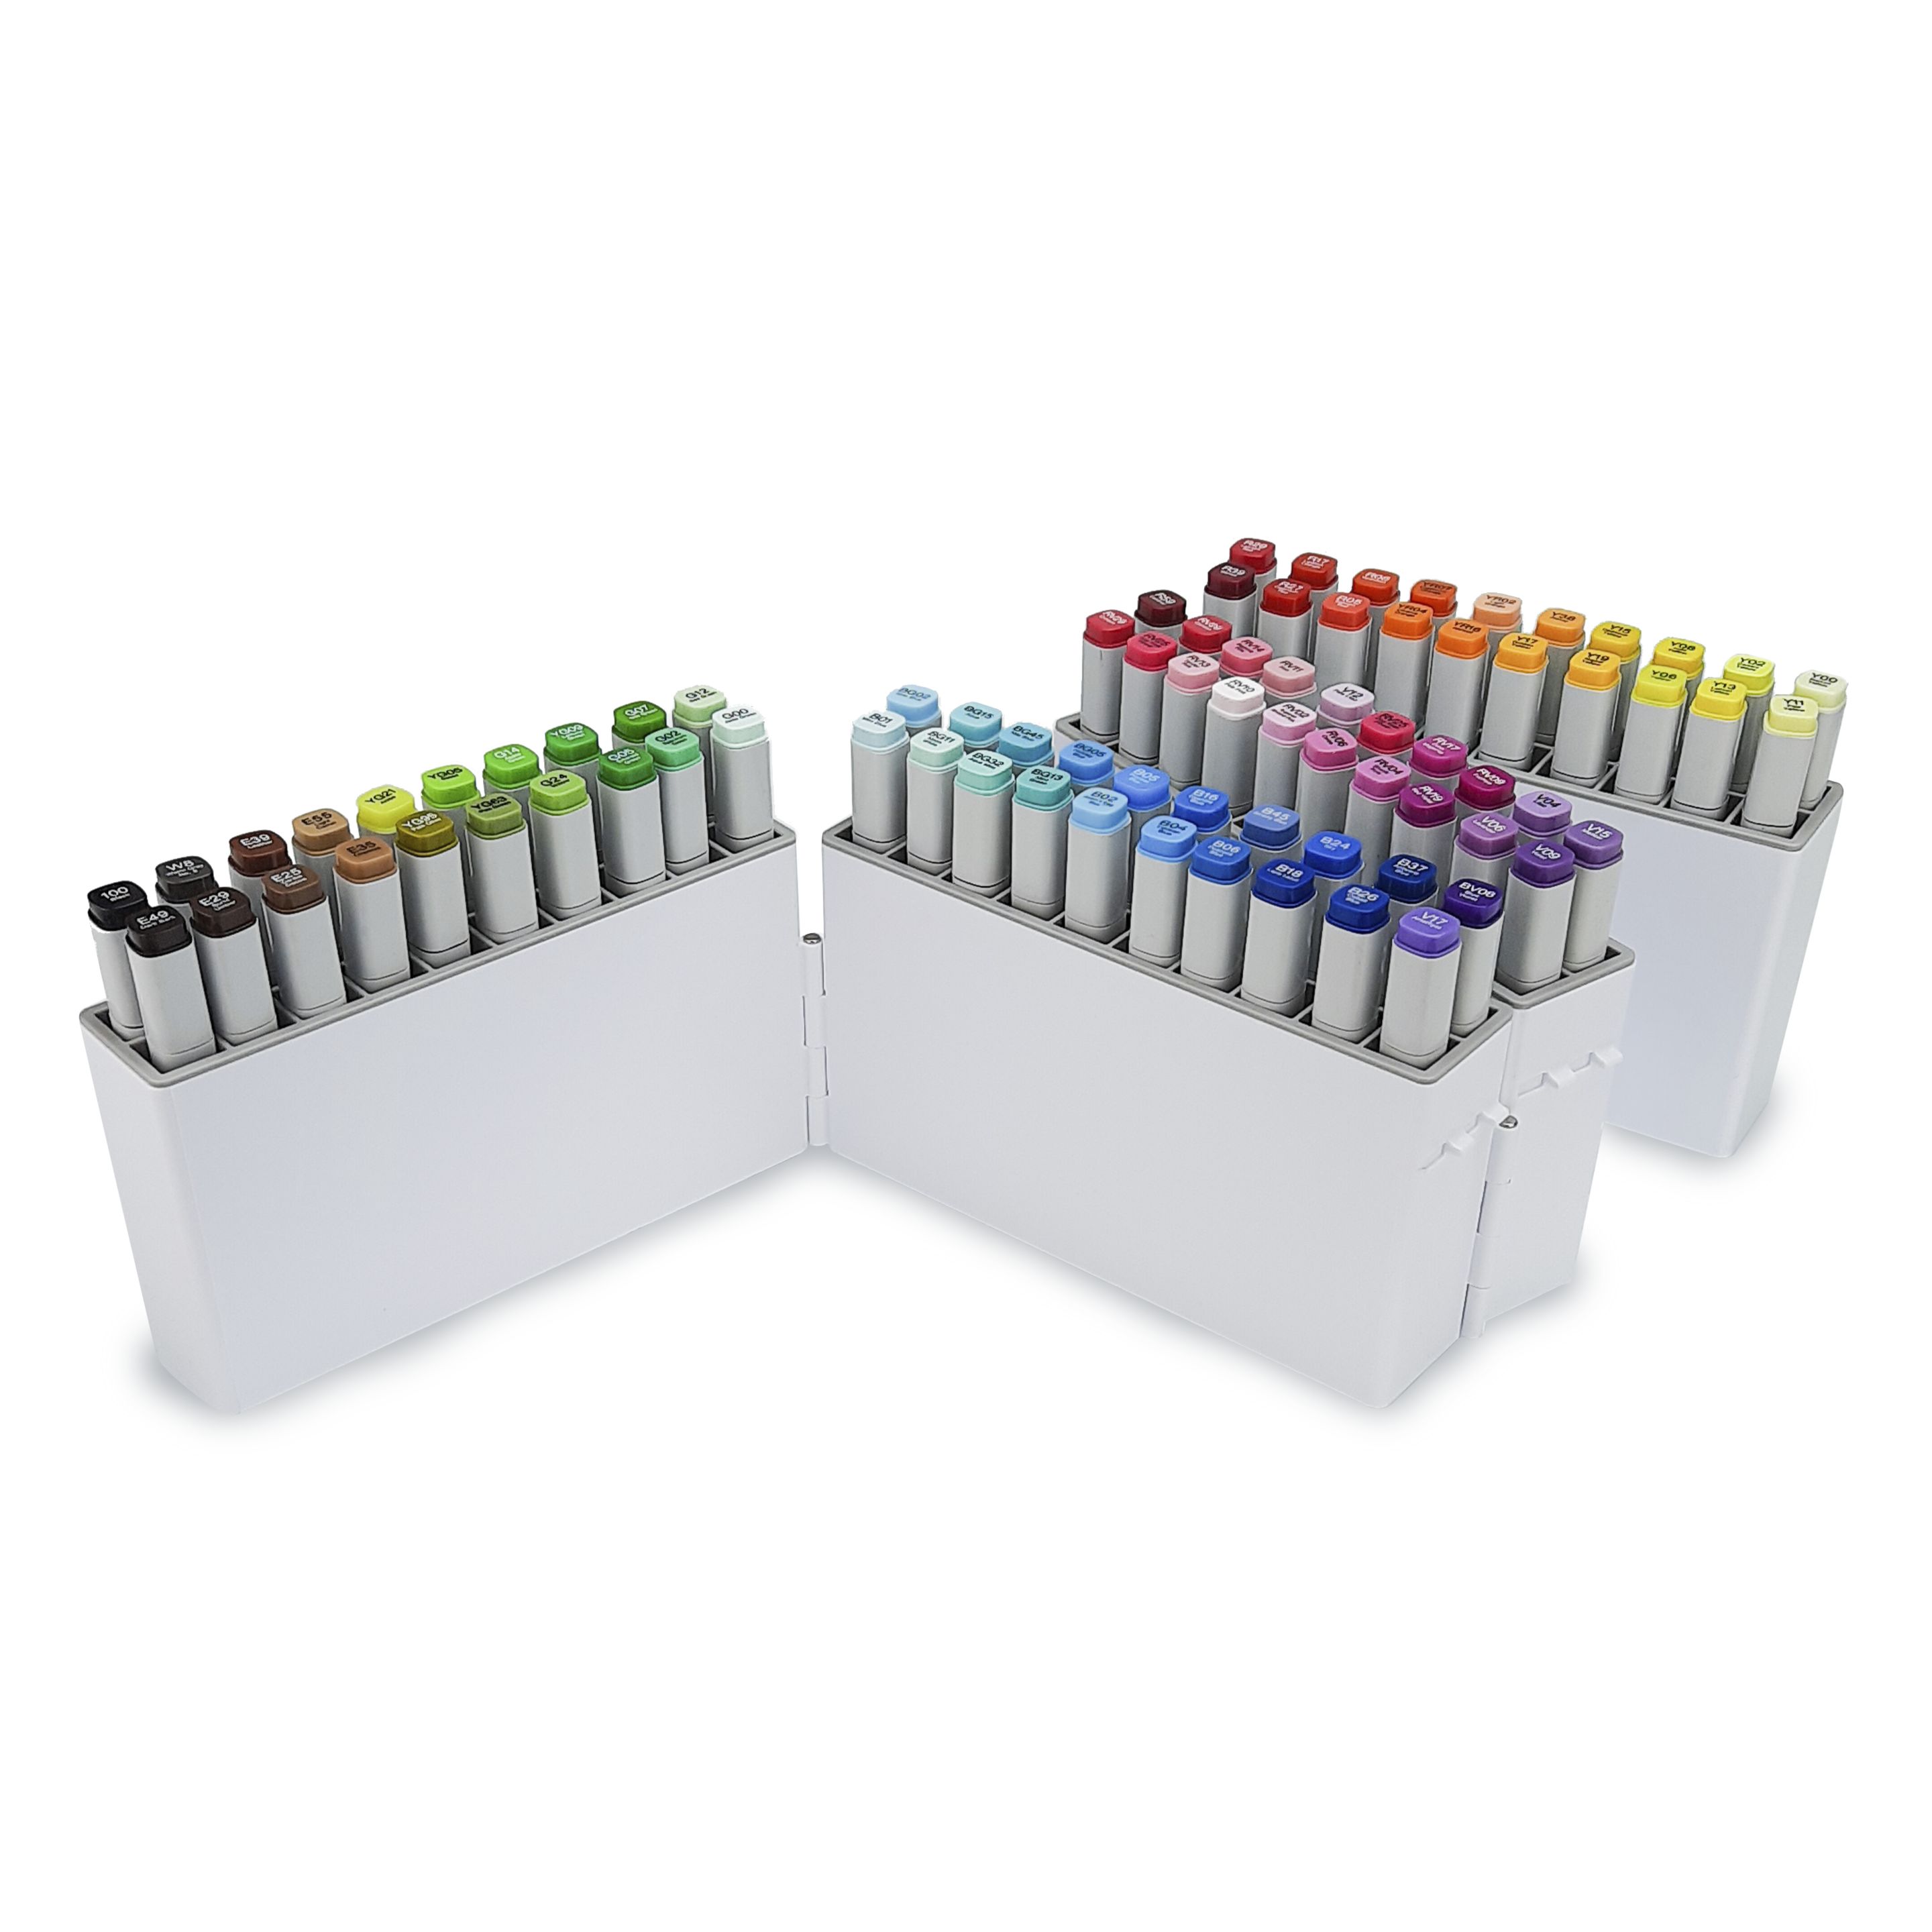 Accordion organizer for markers